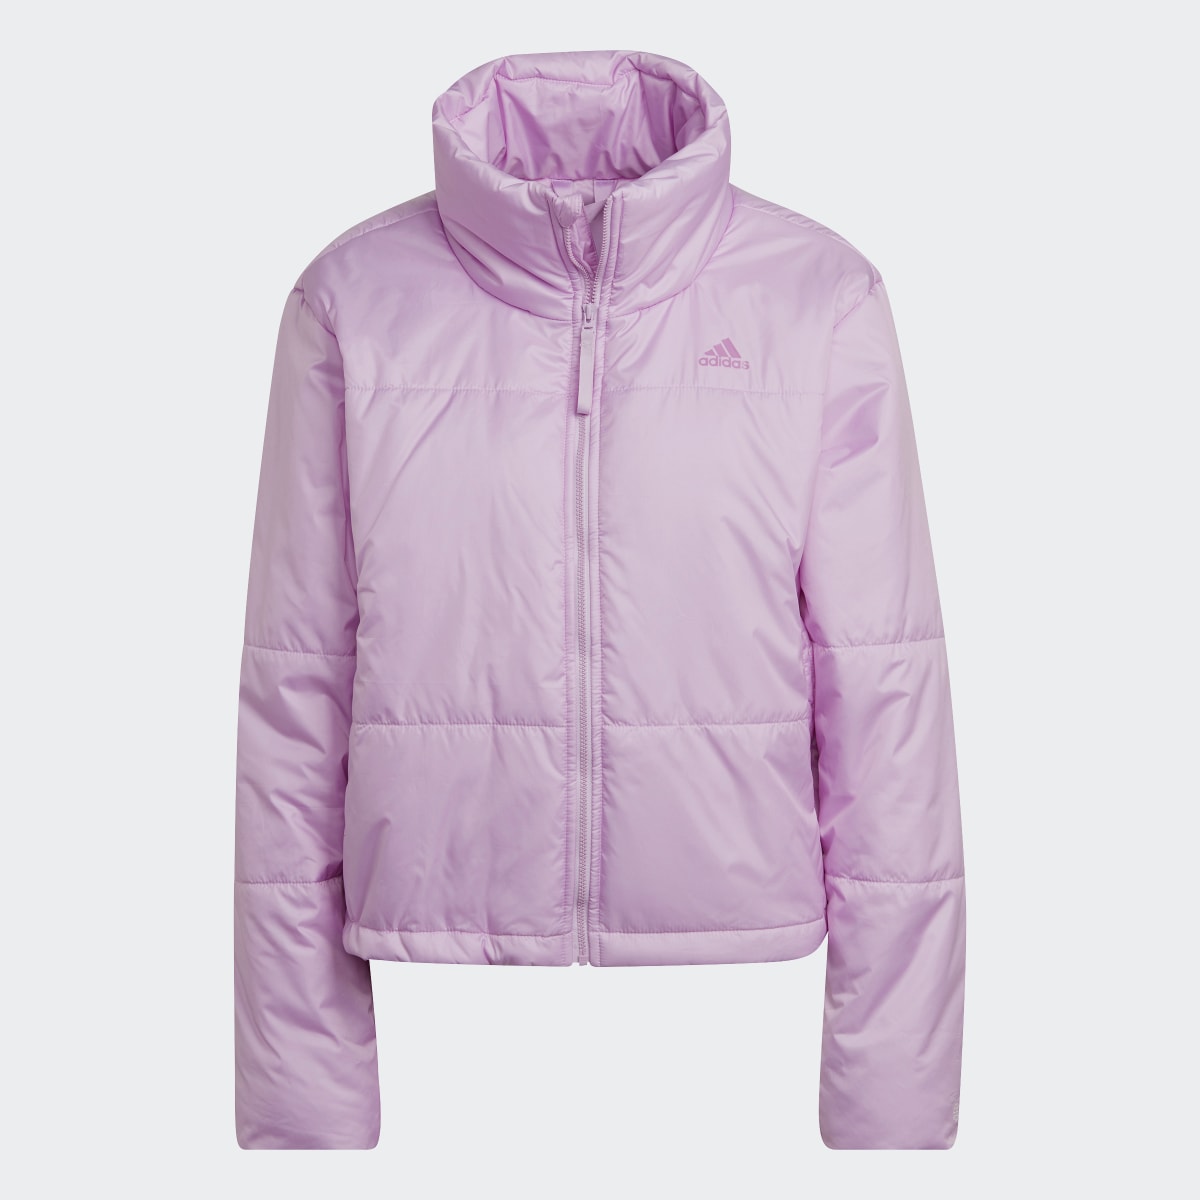 Adidas BSC Insulated Jacket. 5